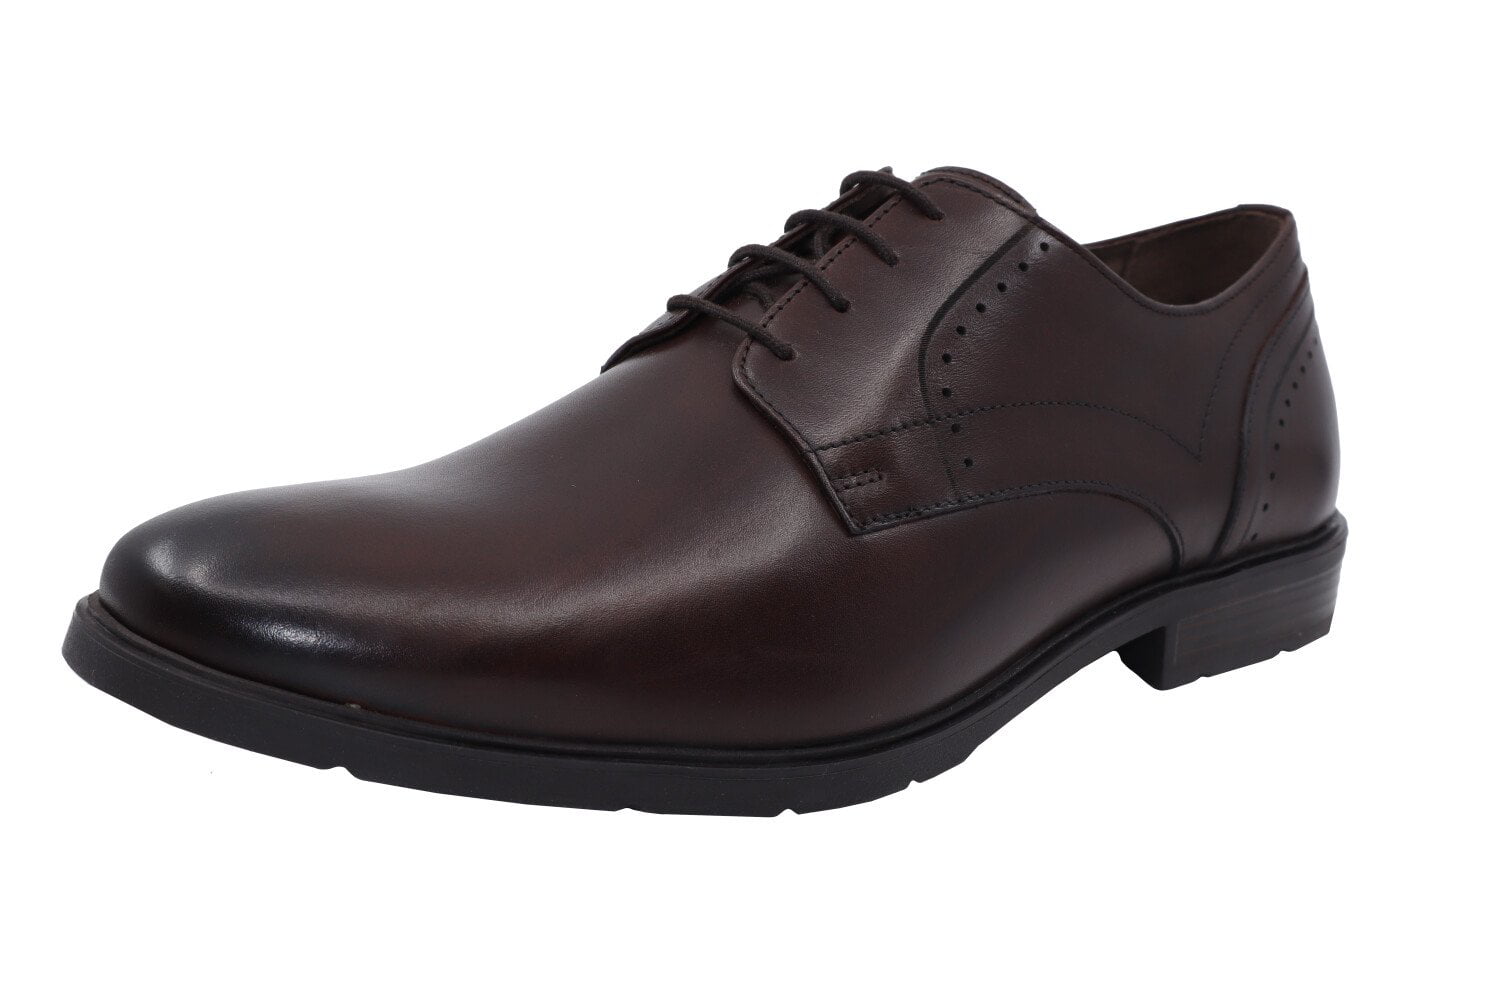 Hush Puppies Men's Advice Pt Derby Dark Brown Ankle-High Leather Oxford ...